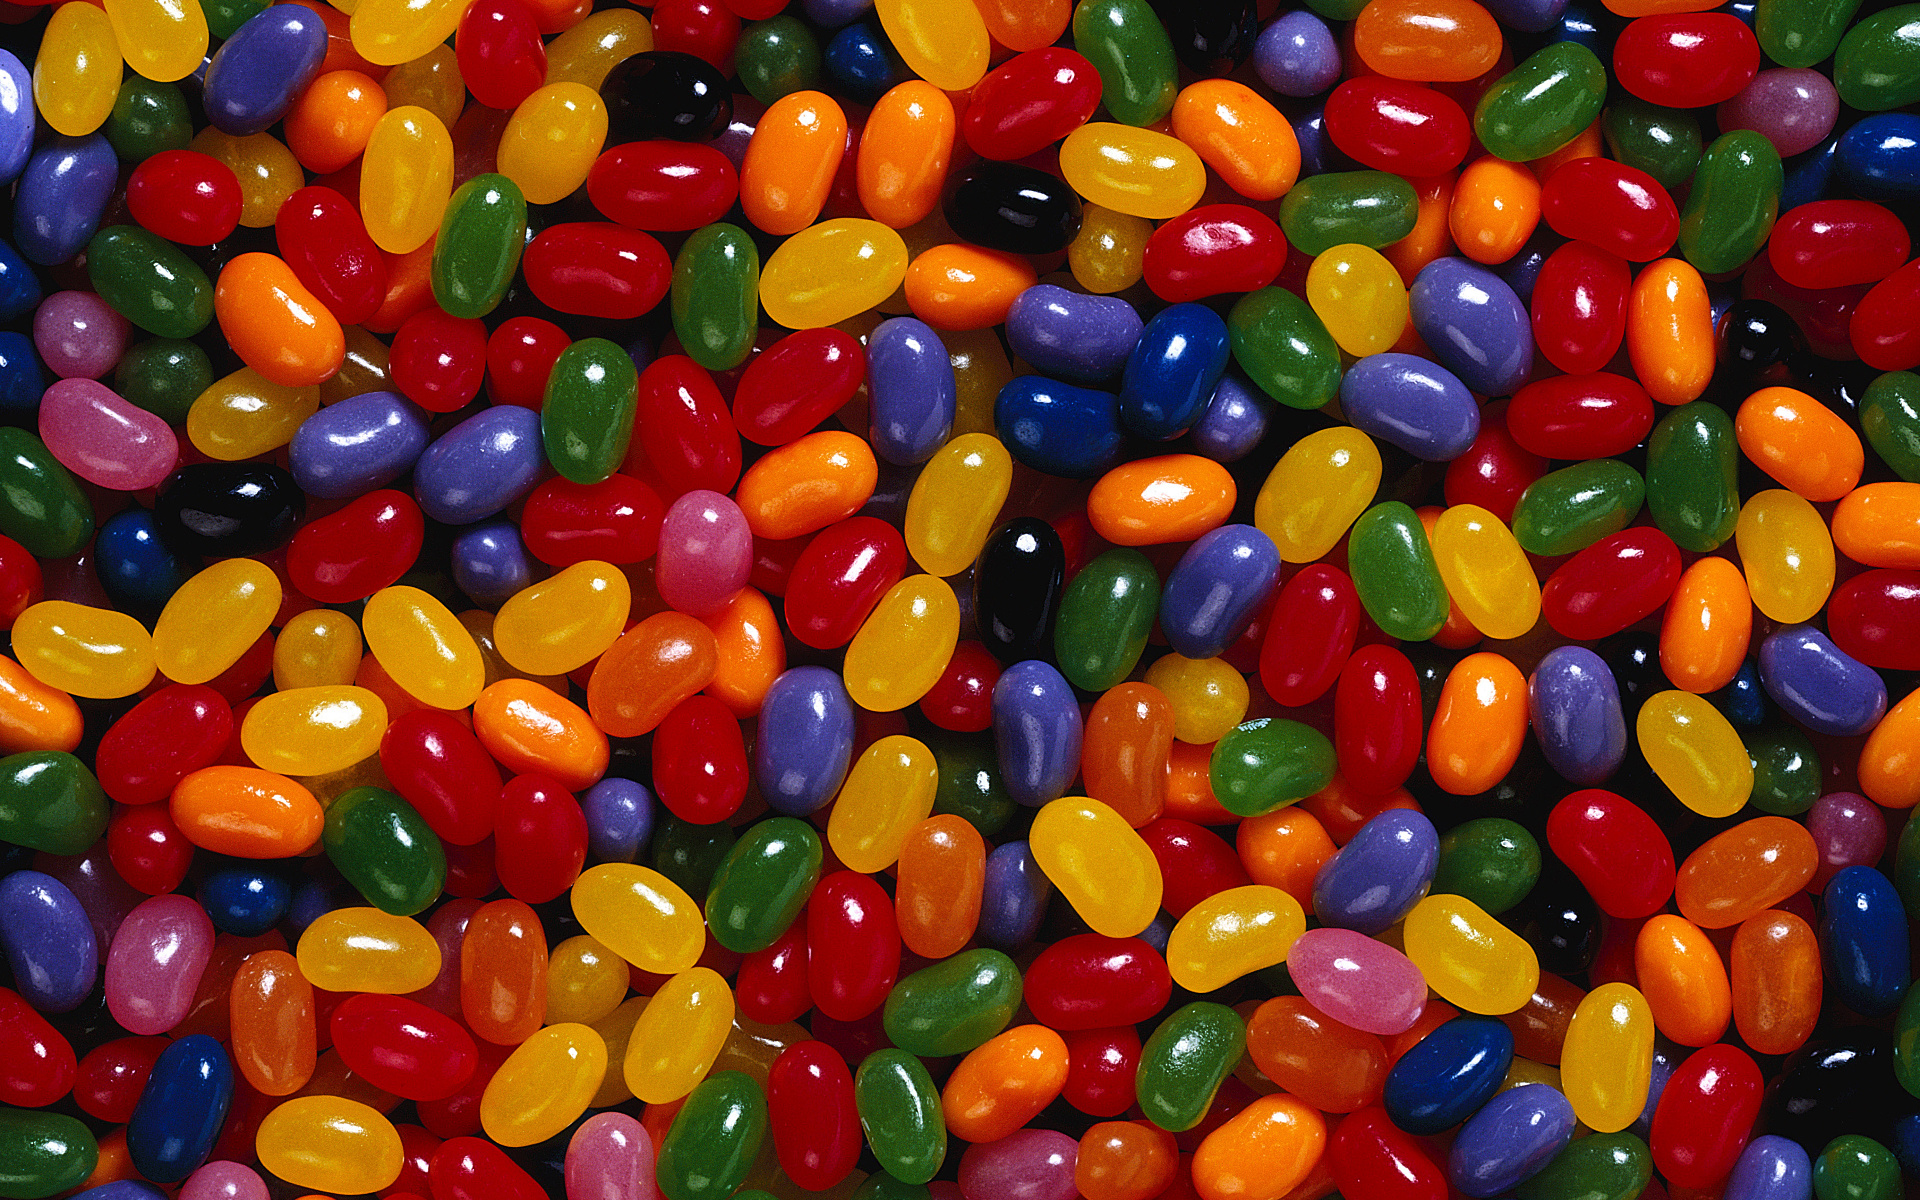 Jelly Beans, Colorful wallpaper, Assorted flavors, Fun and vibrant, 1920x1200 HD Desktop